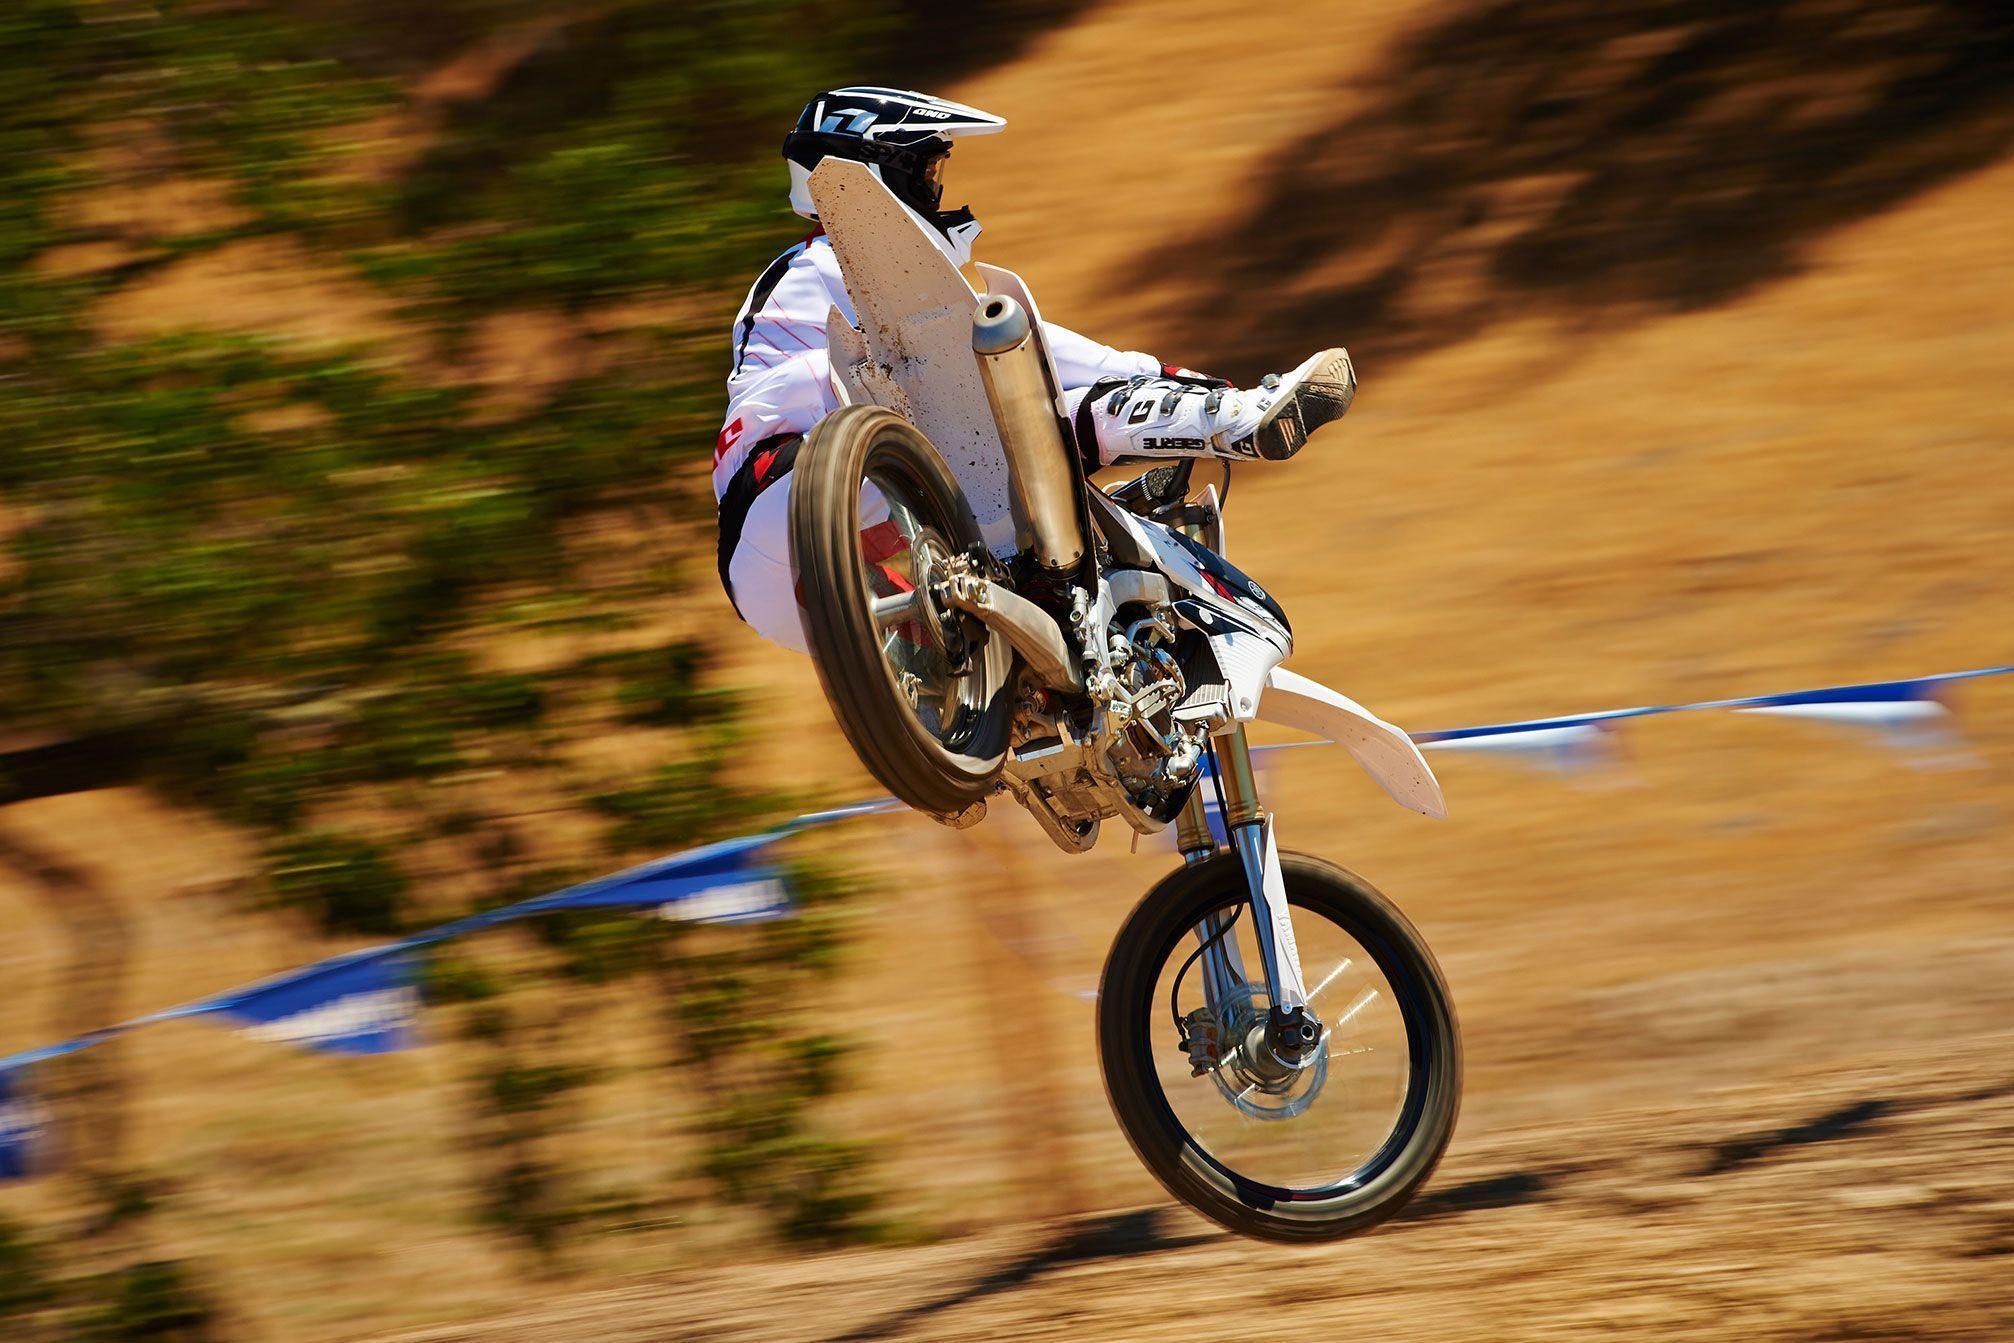 Yamaha YZ450F Motocross Wallpaper Wide or HD. Motorcycles